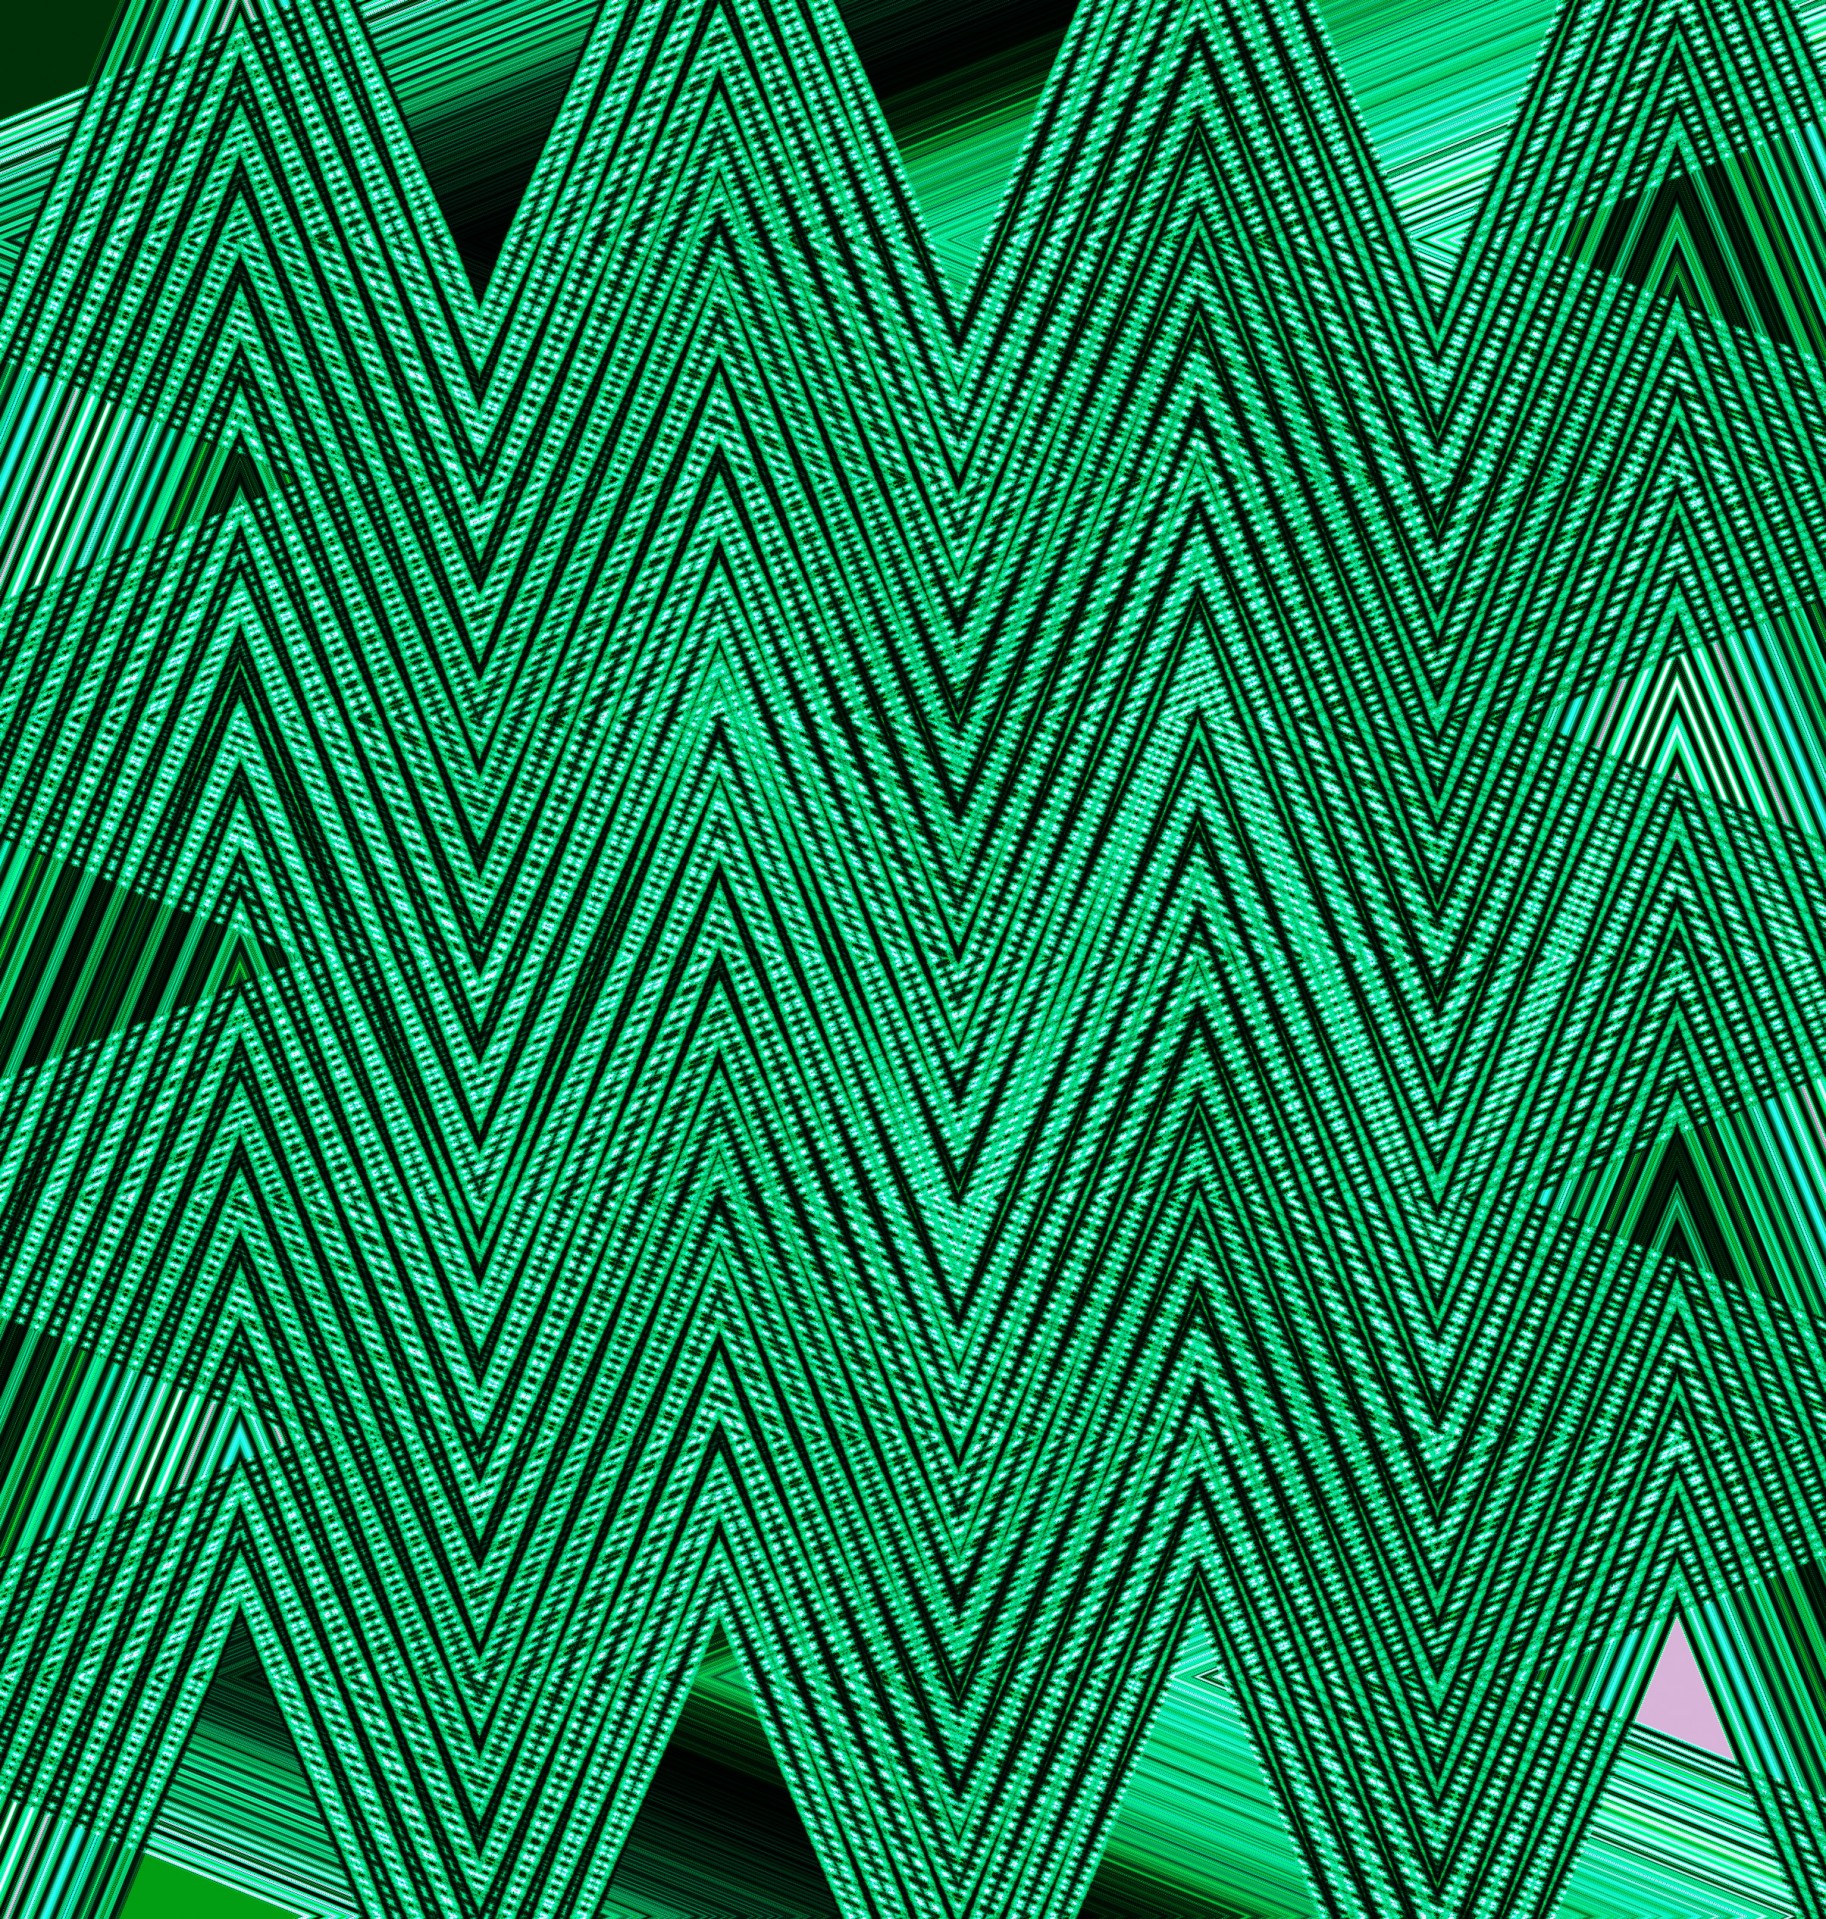 Download Surface Green Zig-Zag Free Photo.